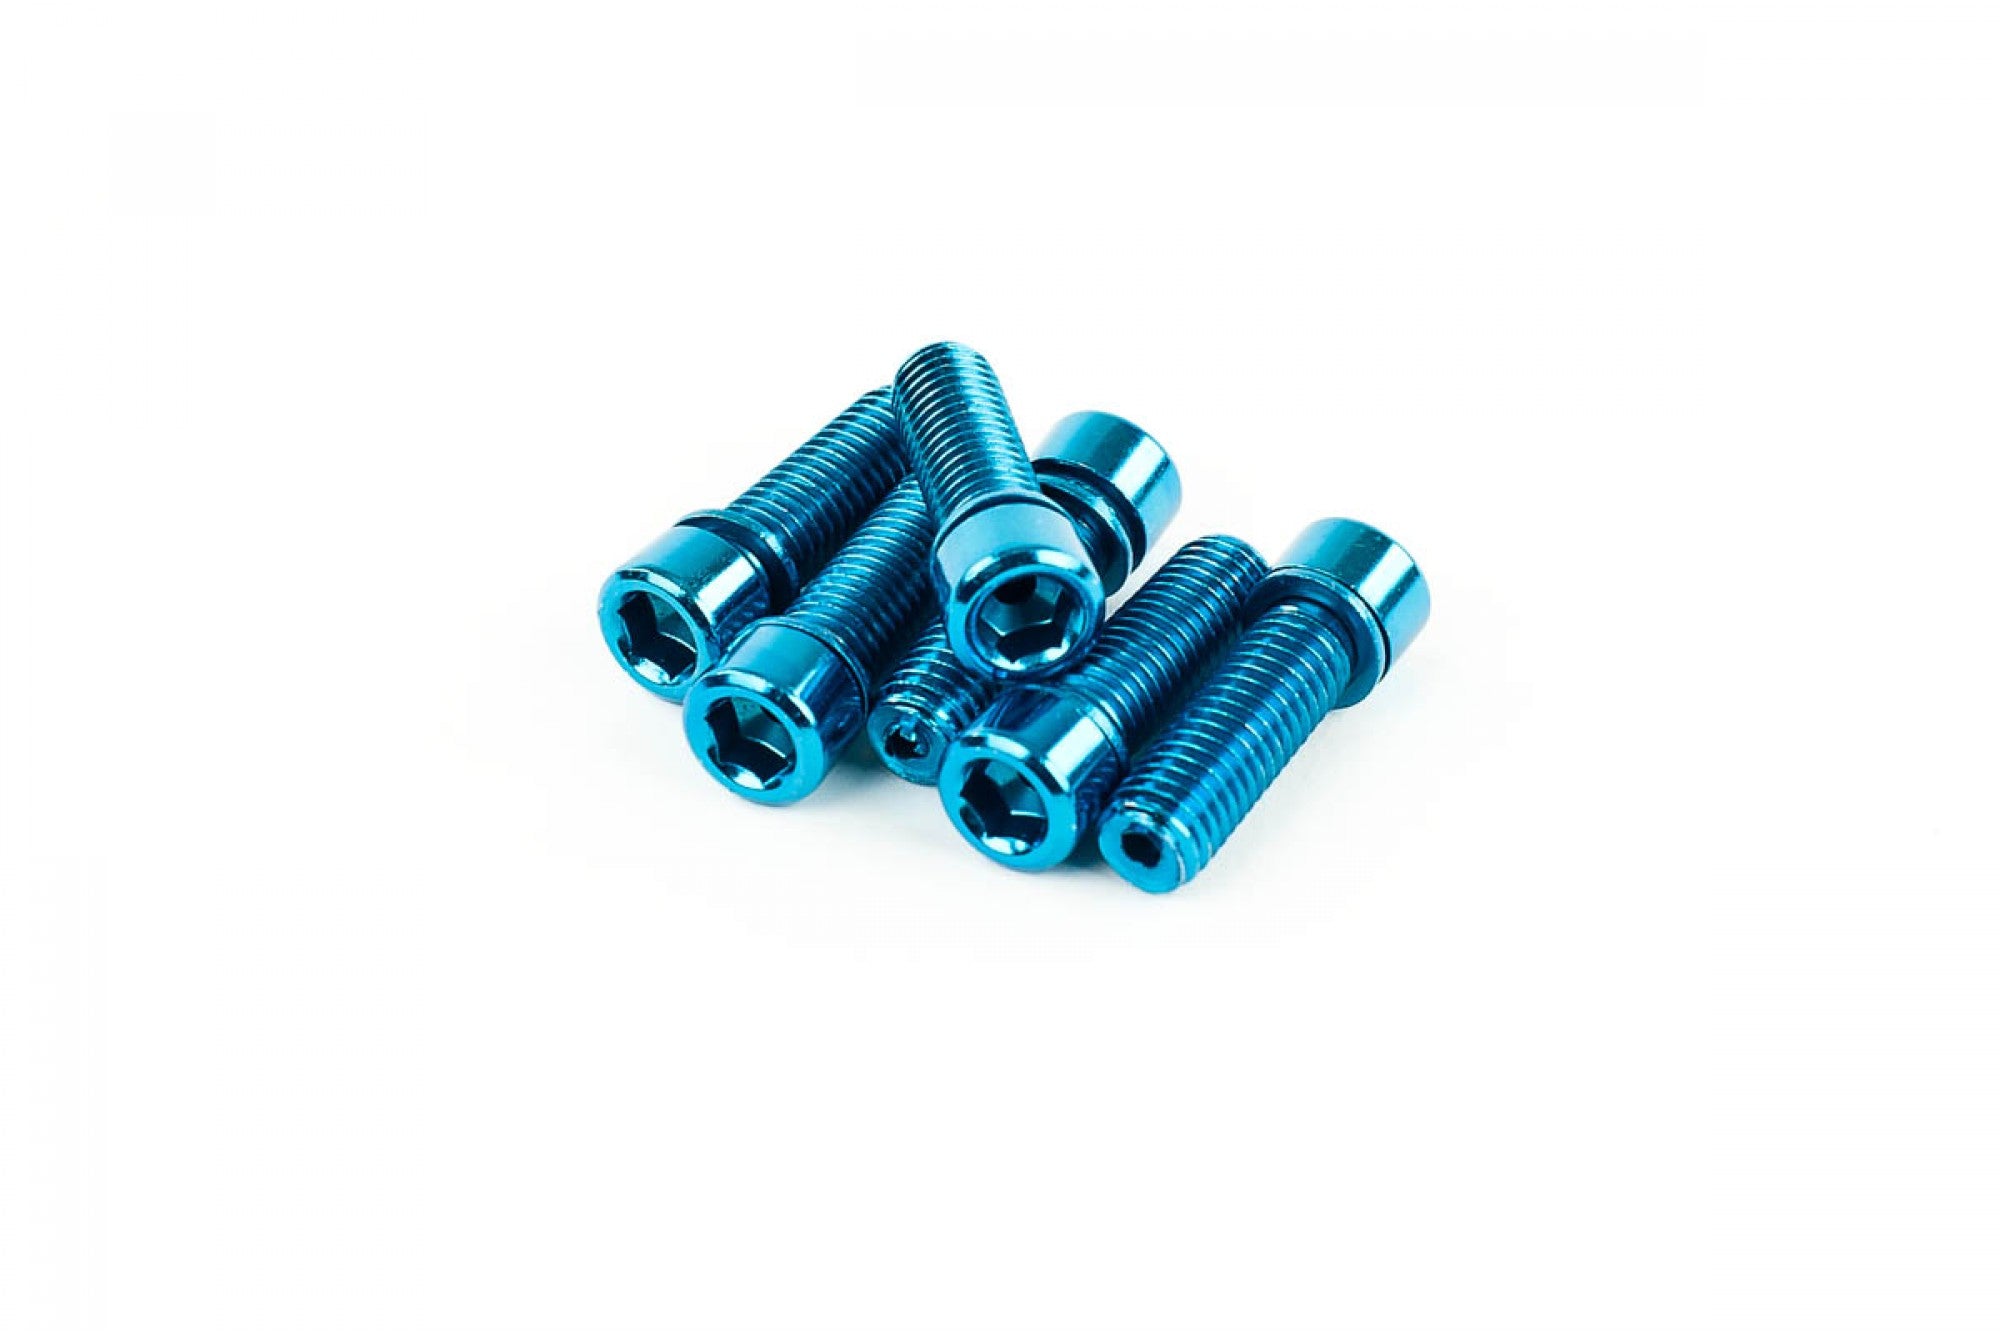 Mission Bicycle Stem 26mm Bolts (Various Colors)